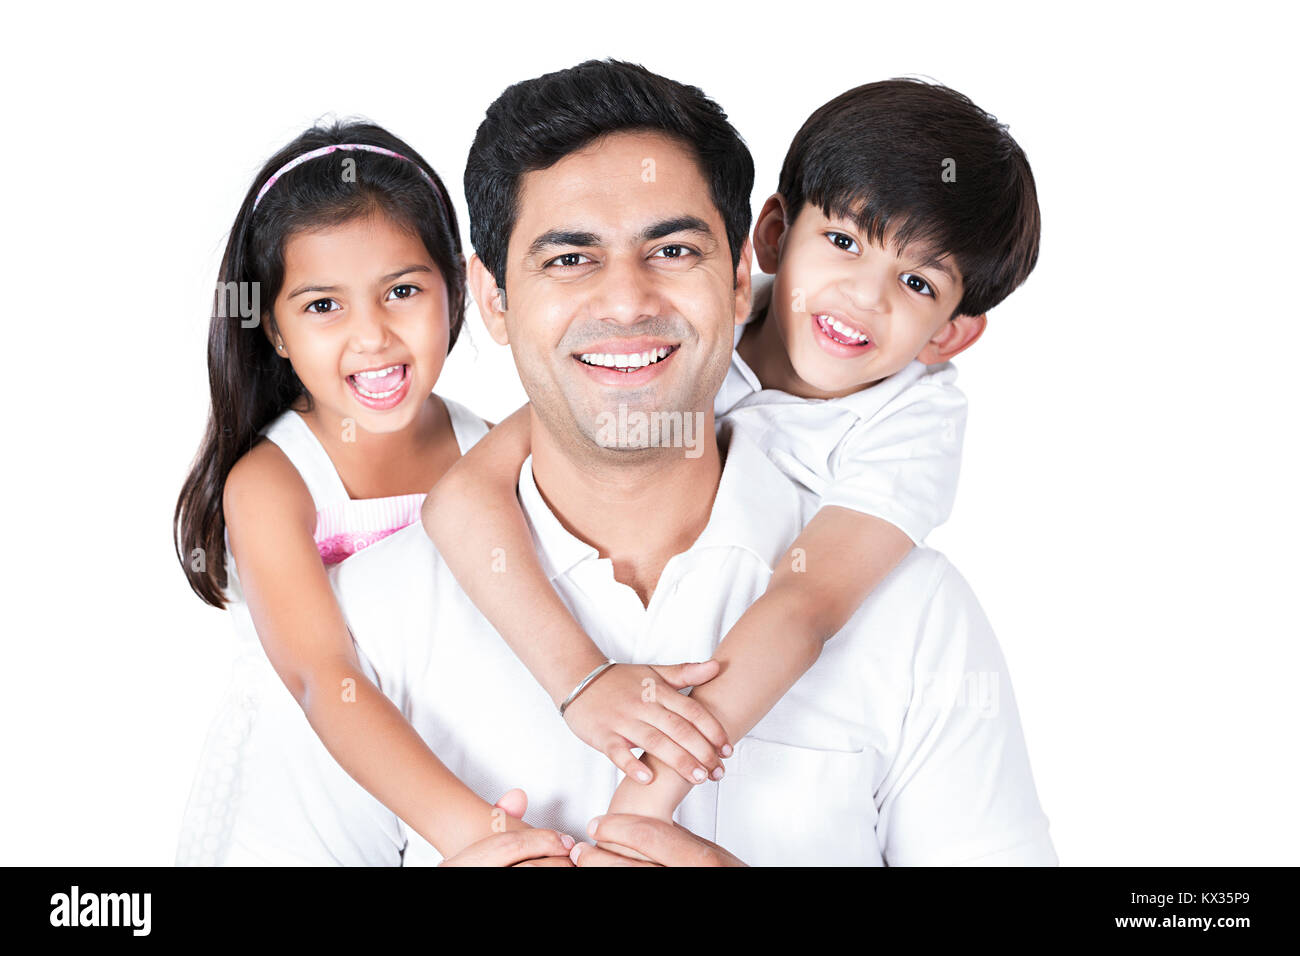 Happy Father And Children Piggyback Riding Fun Cheerful Playful Stock Photo